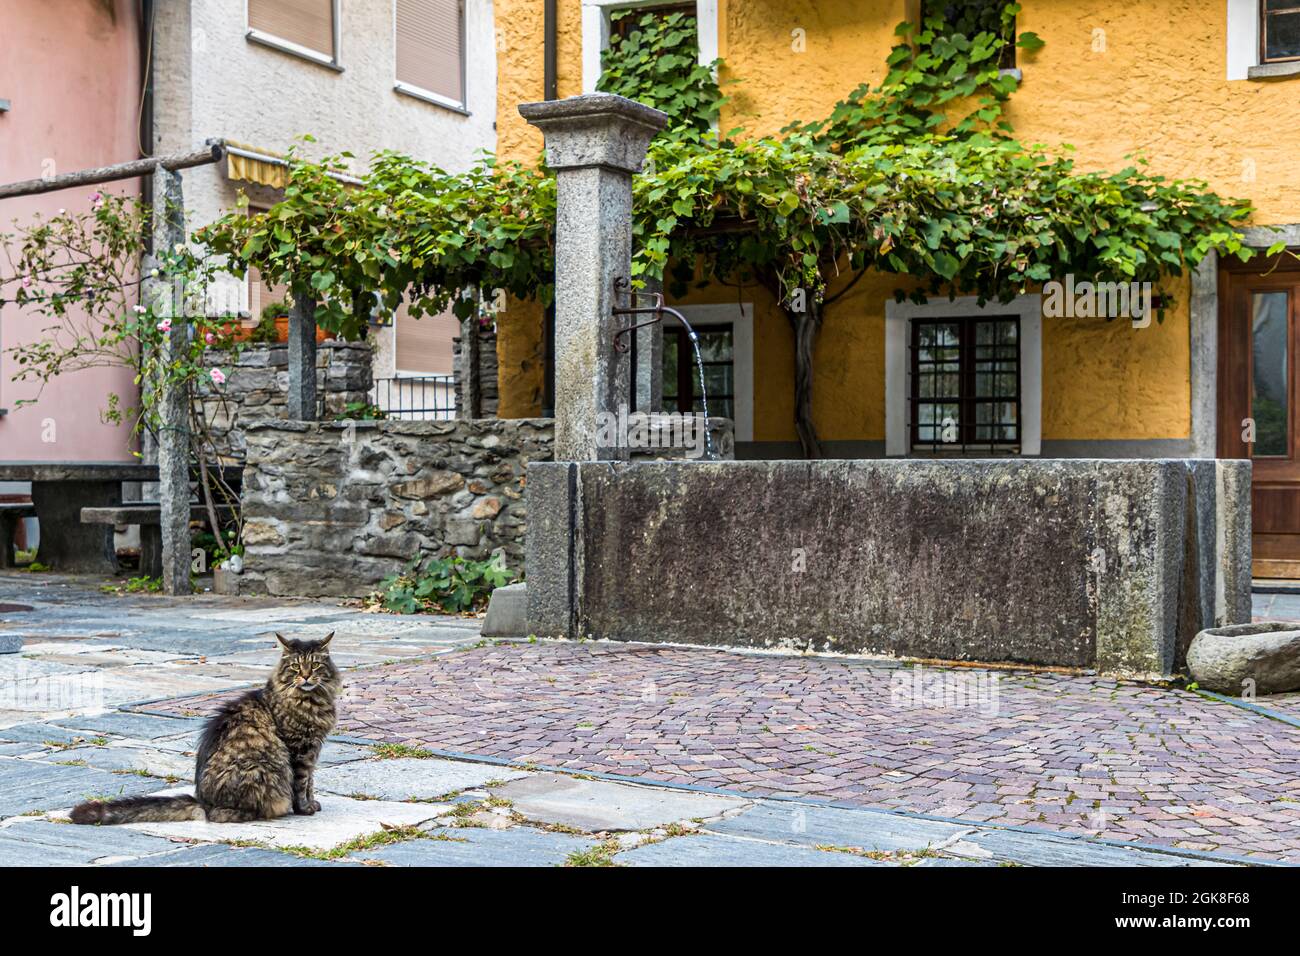 Honestly, what would this photo be without a cat? Cats are often free-roaming decoration that enliven a photo. The splashing fountain in the background is pretty, but only the curved back of the cat as a counterpart makes the photo worth seeing. Cat in front of a village well in Moghegno, Circolo della Maggia, Switzerland Stock Photo